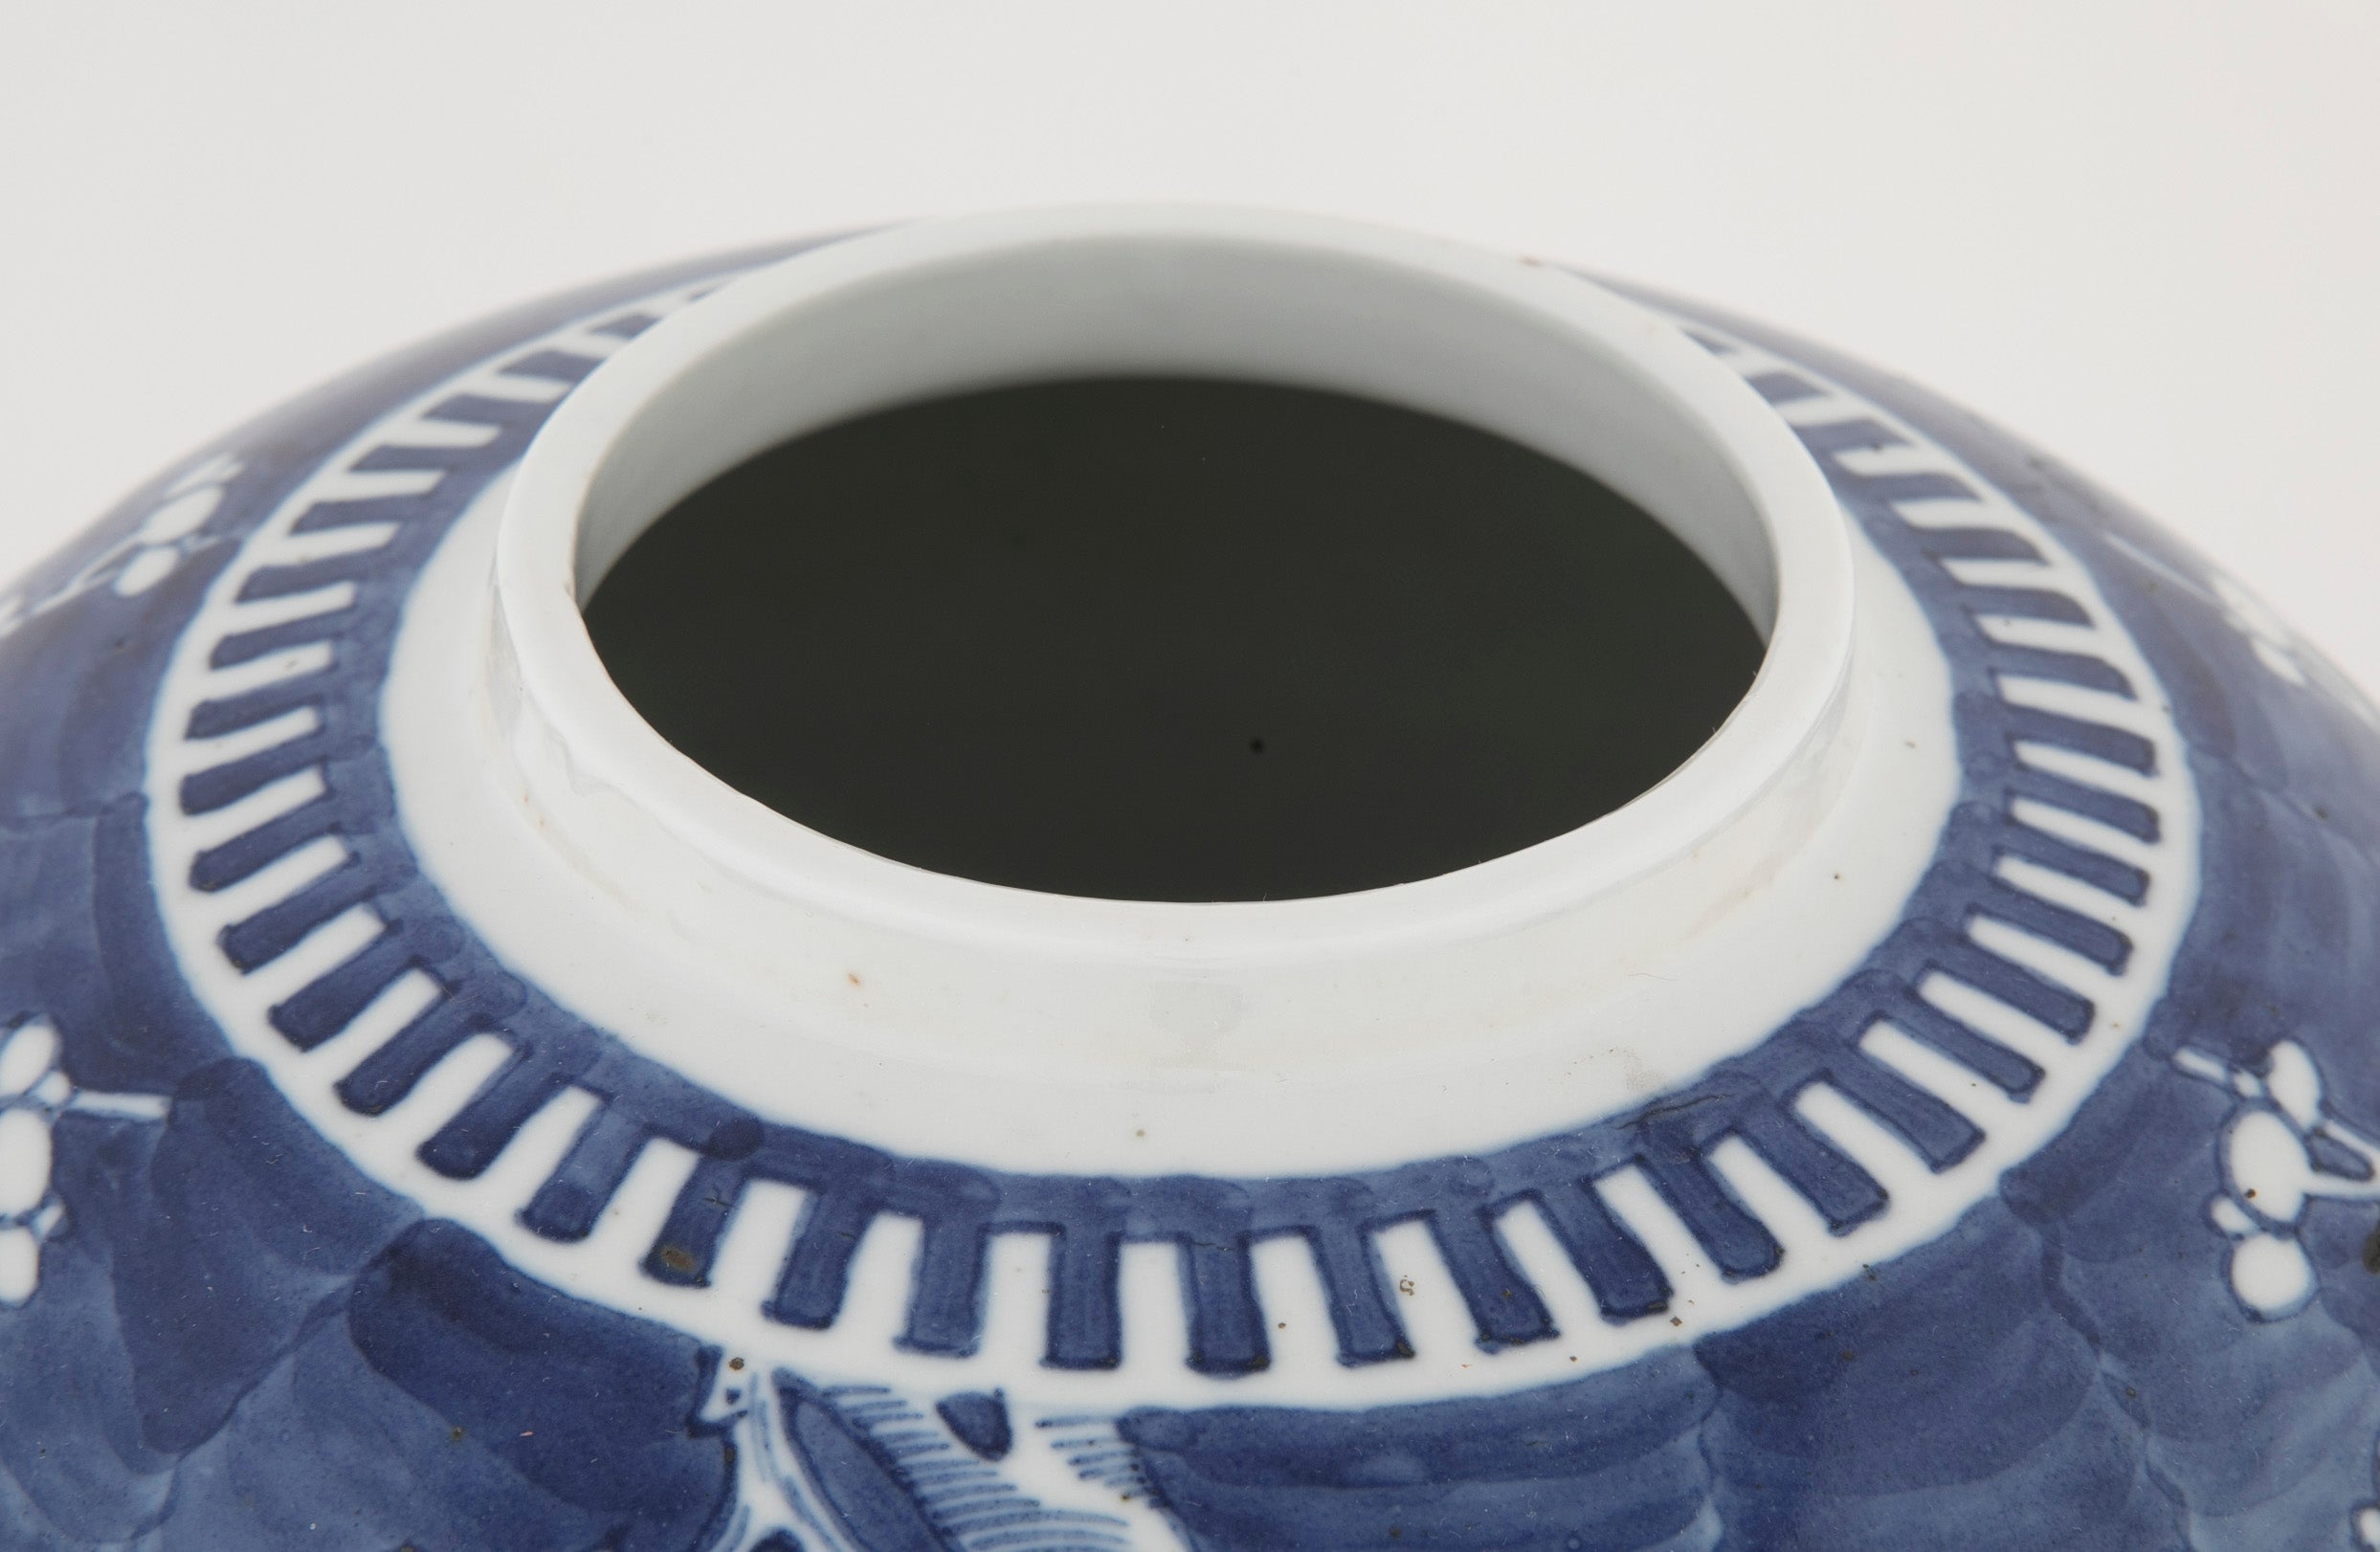 19th Century Chinese Blue and White Covered Jar